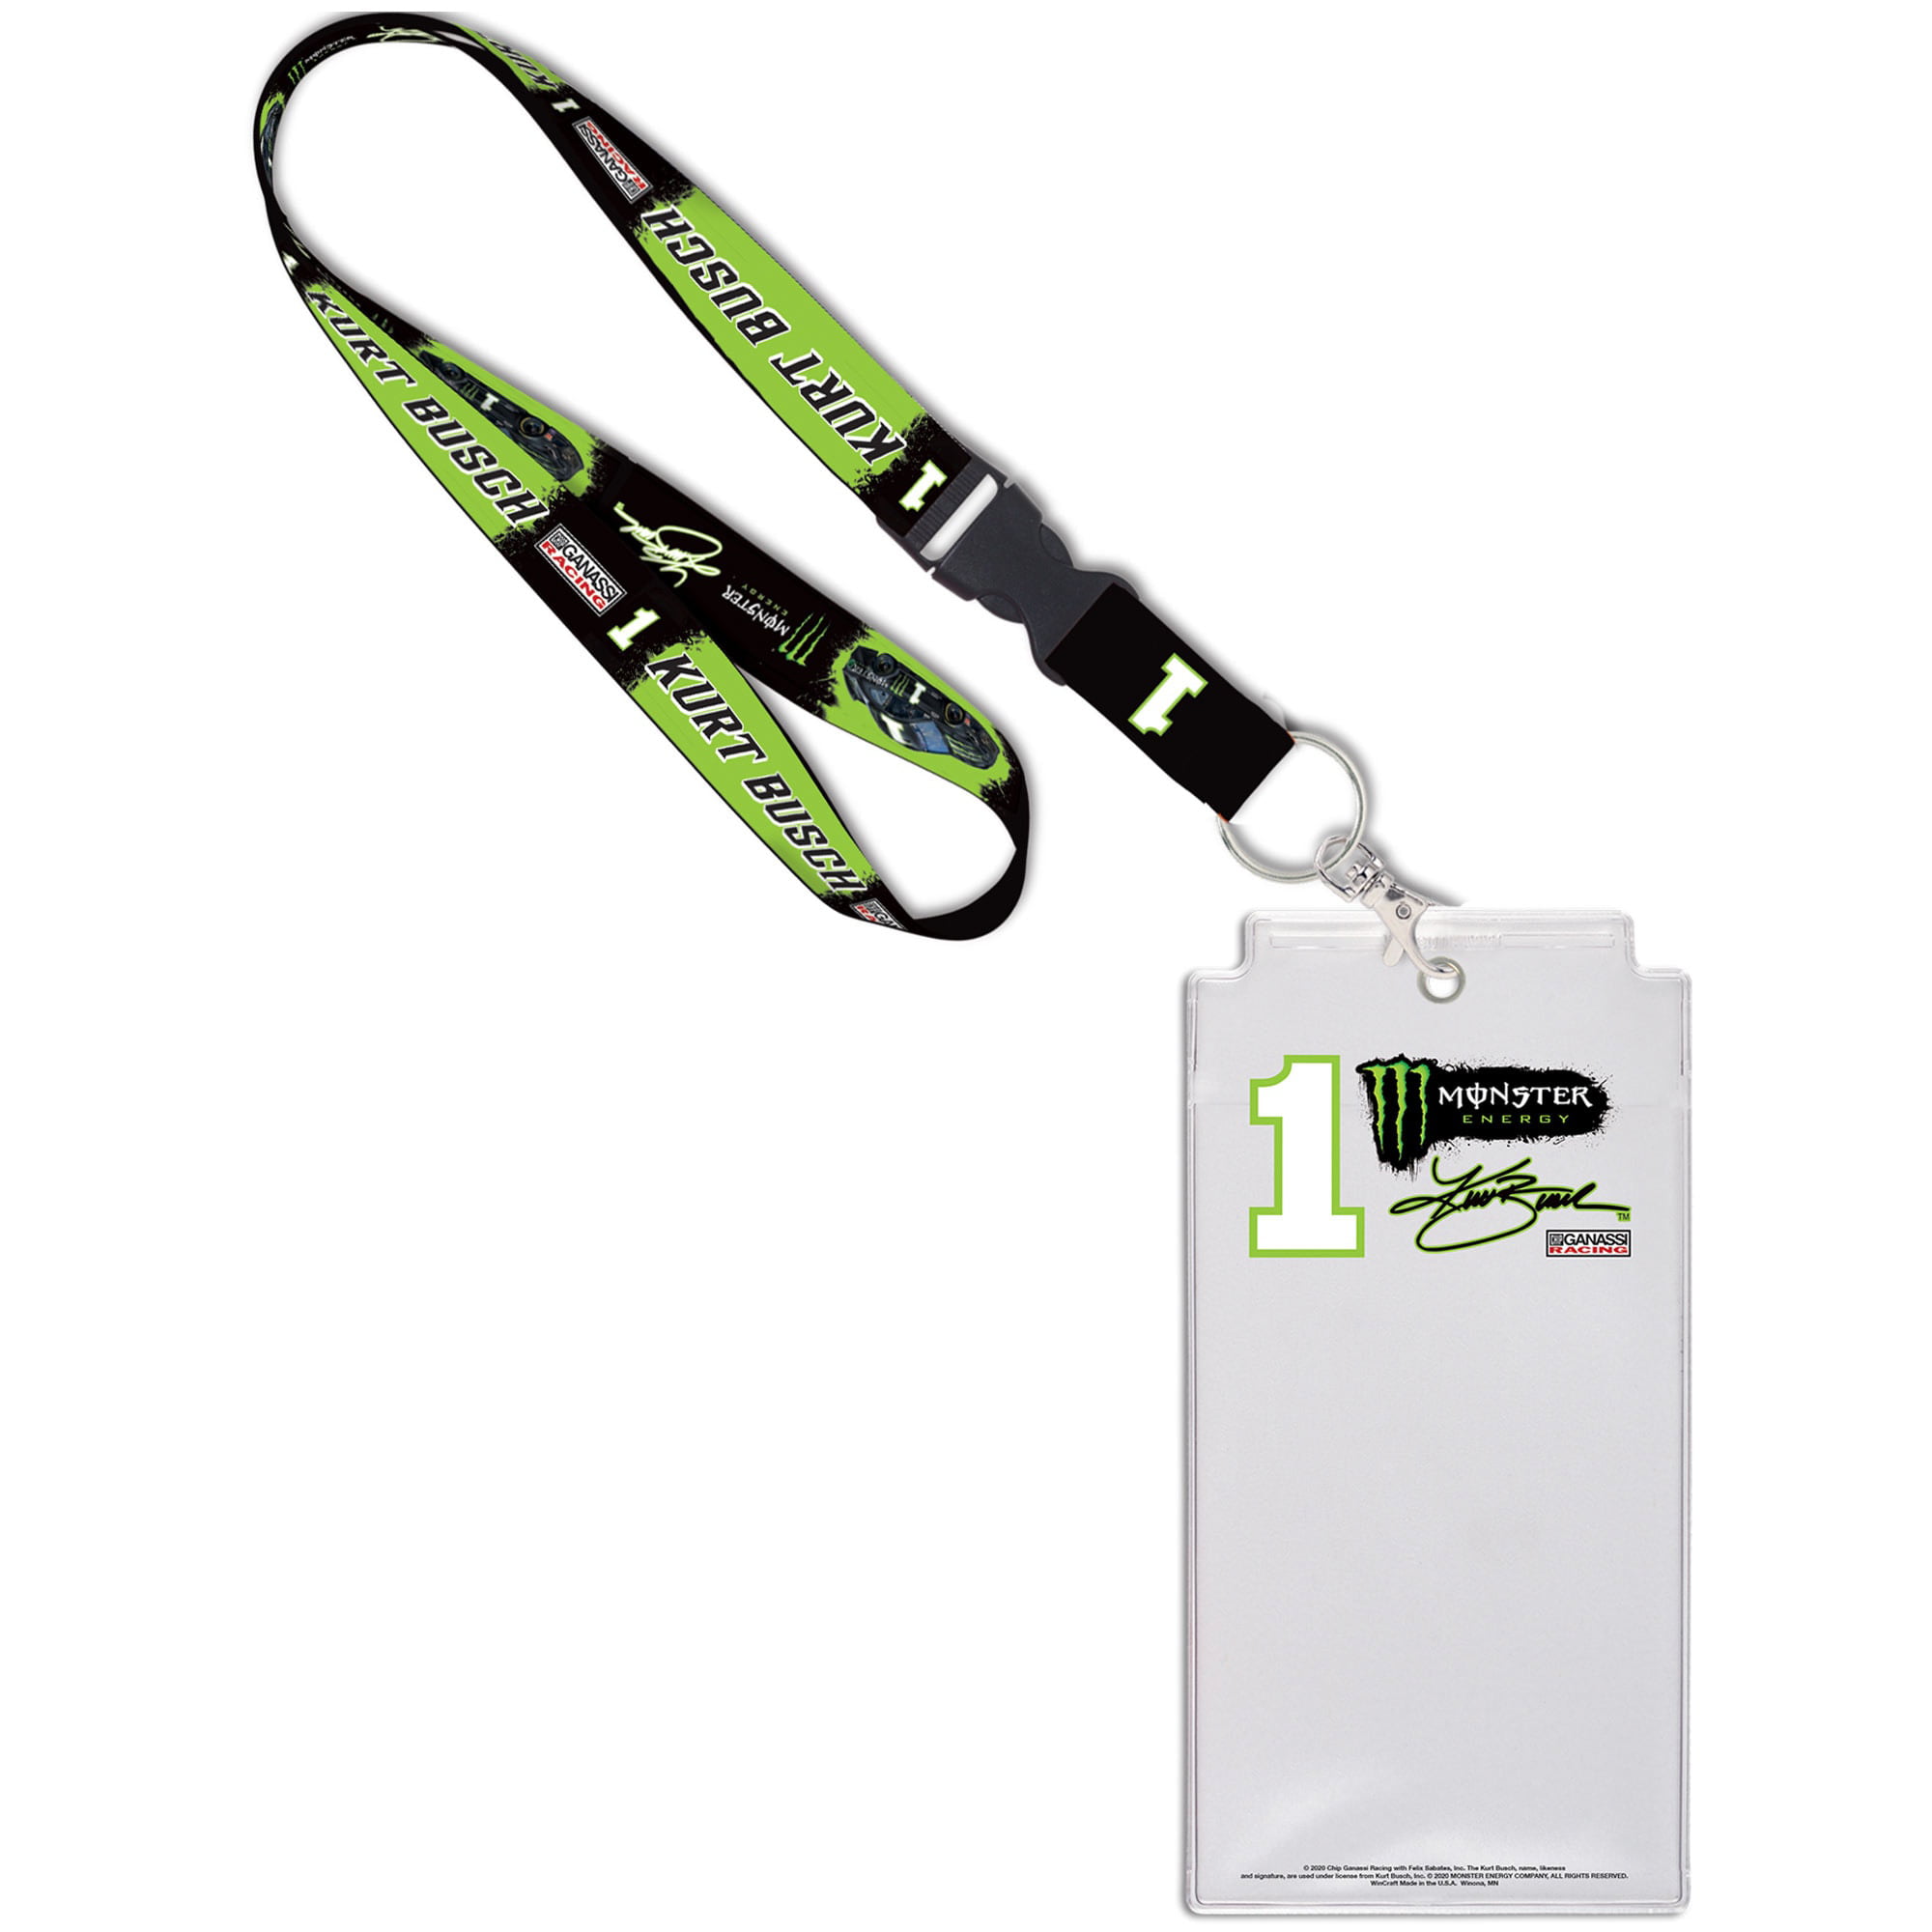 Nascar Deluxe Credential Holder w/ Lanyard 